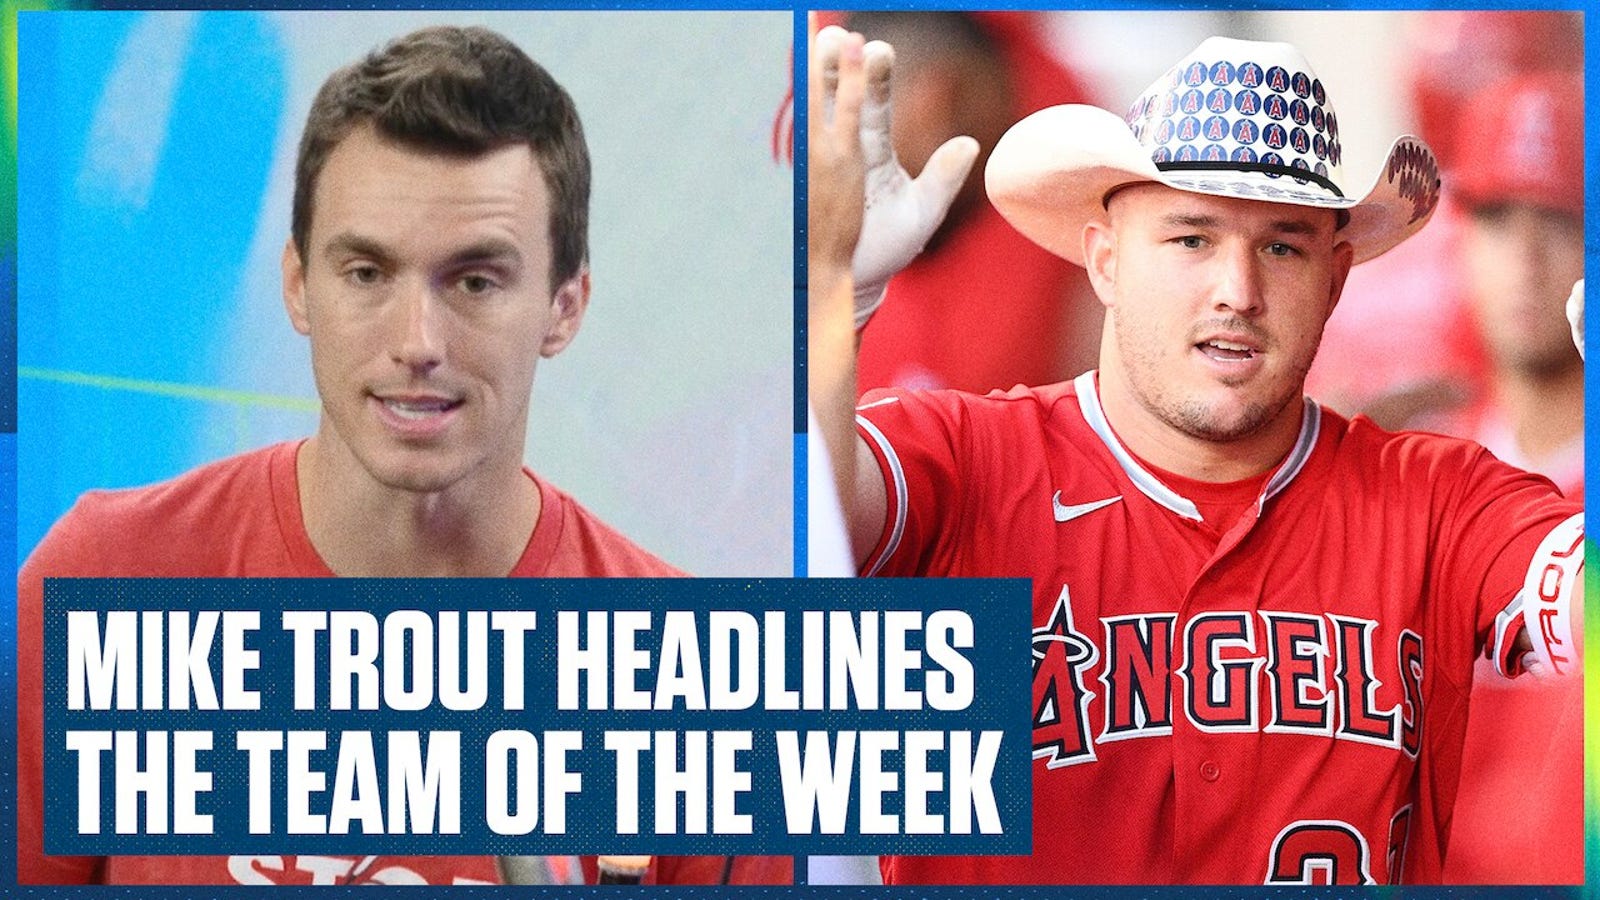 Mike Trout, Freddy Freeman and Aaron Judge lead Team of the Week